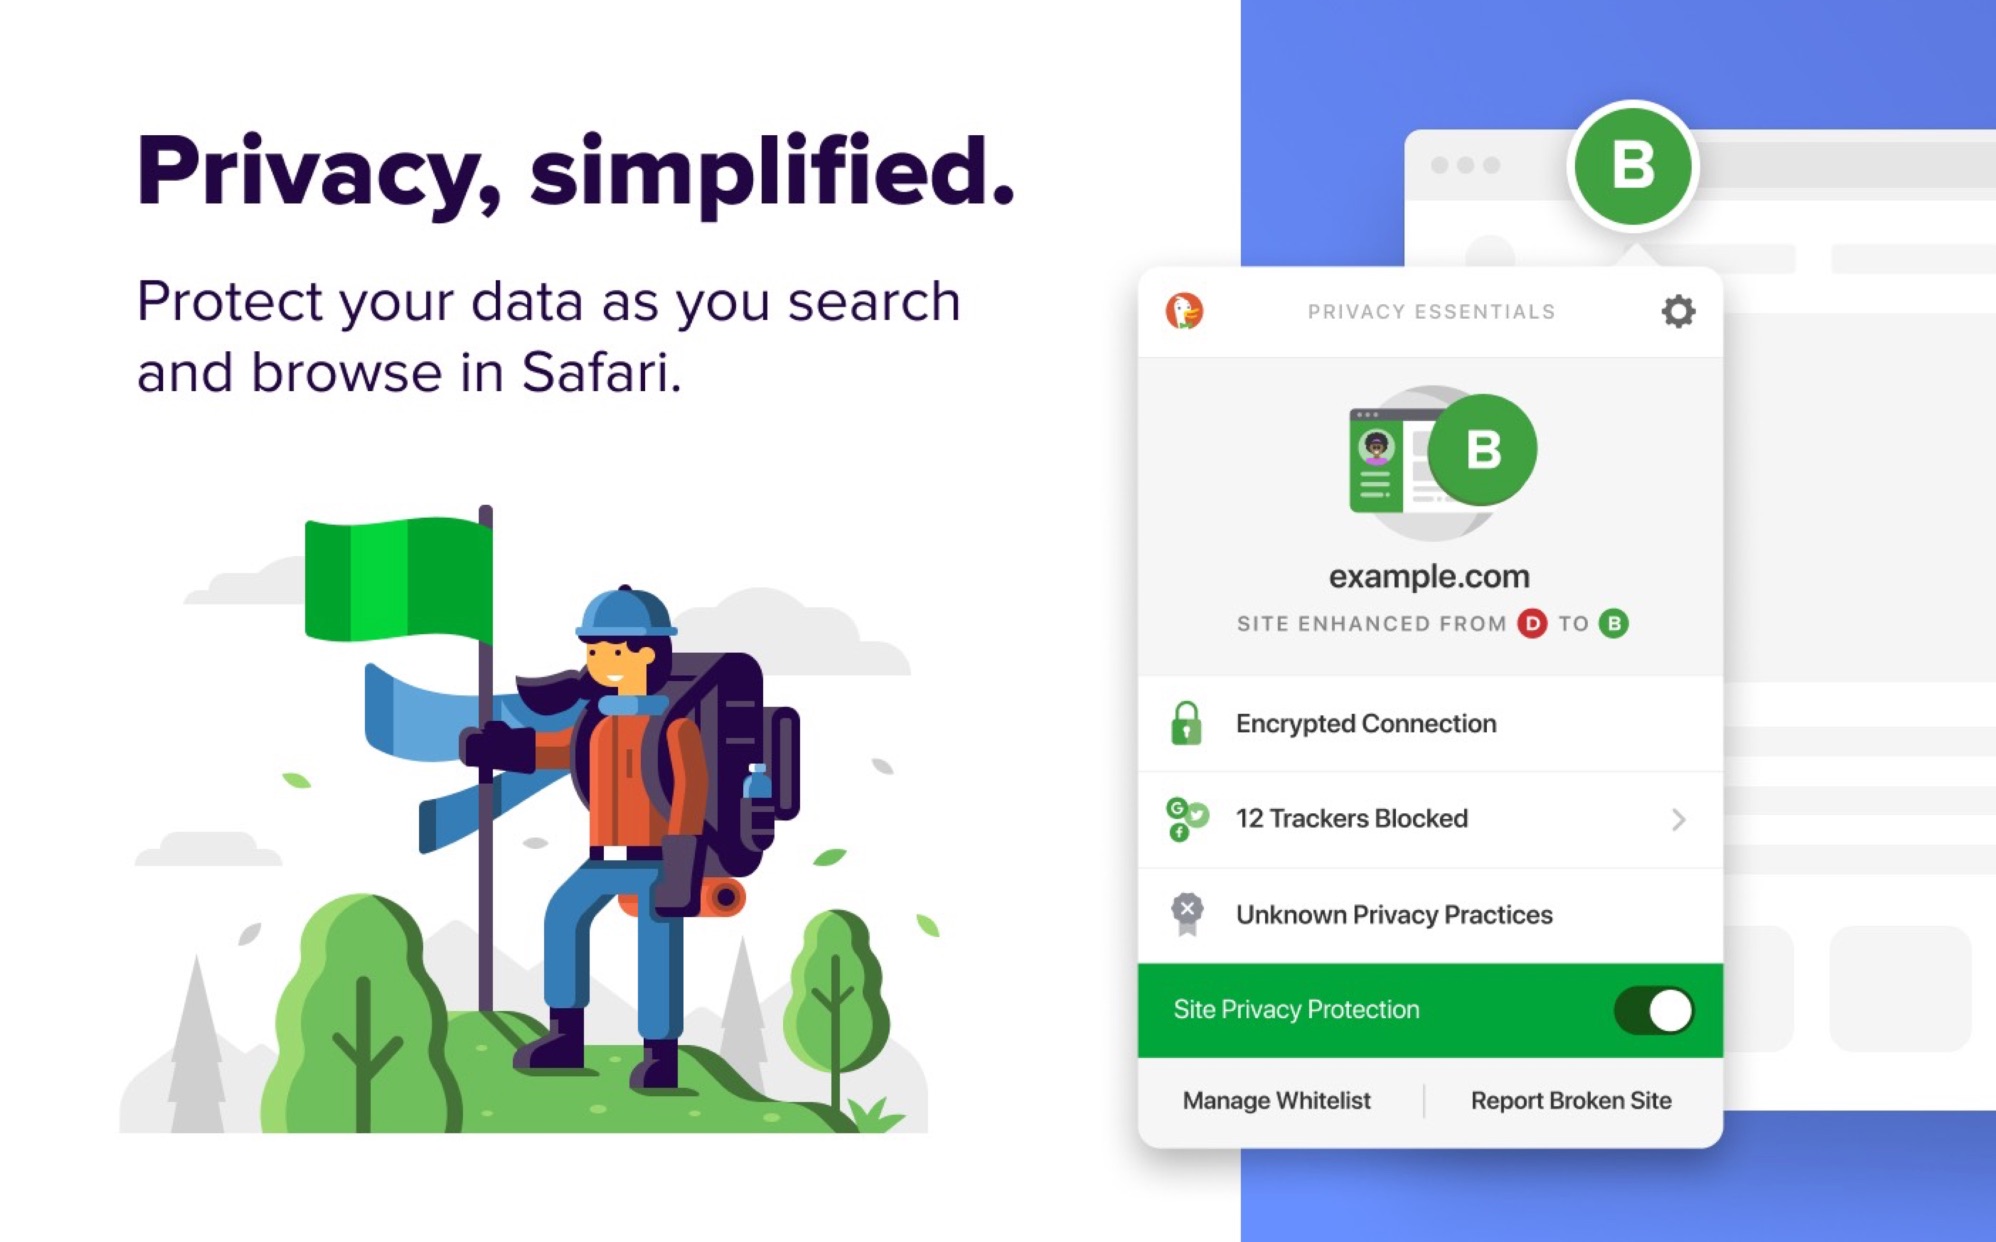 DuckDuckGo Privacy Essentials Extension Once Again Available for Safari